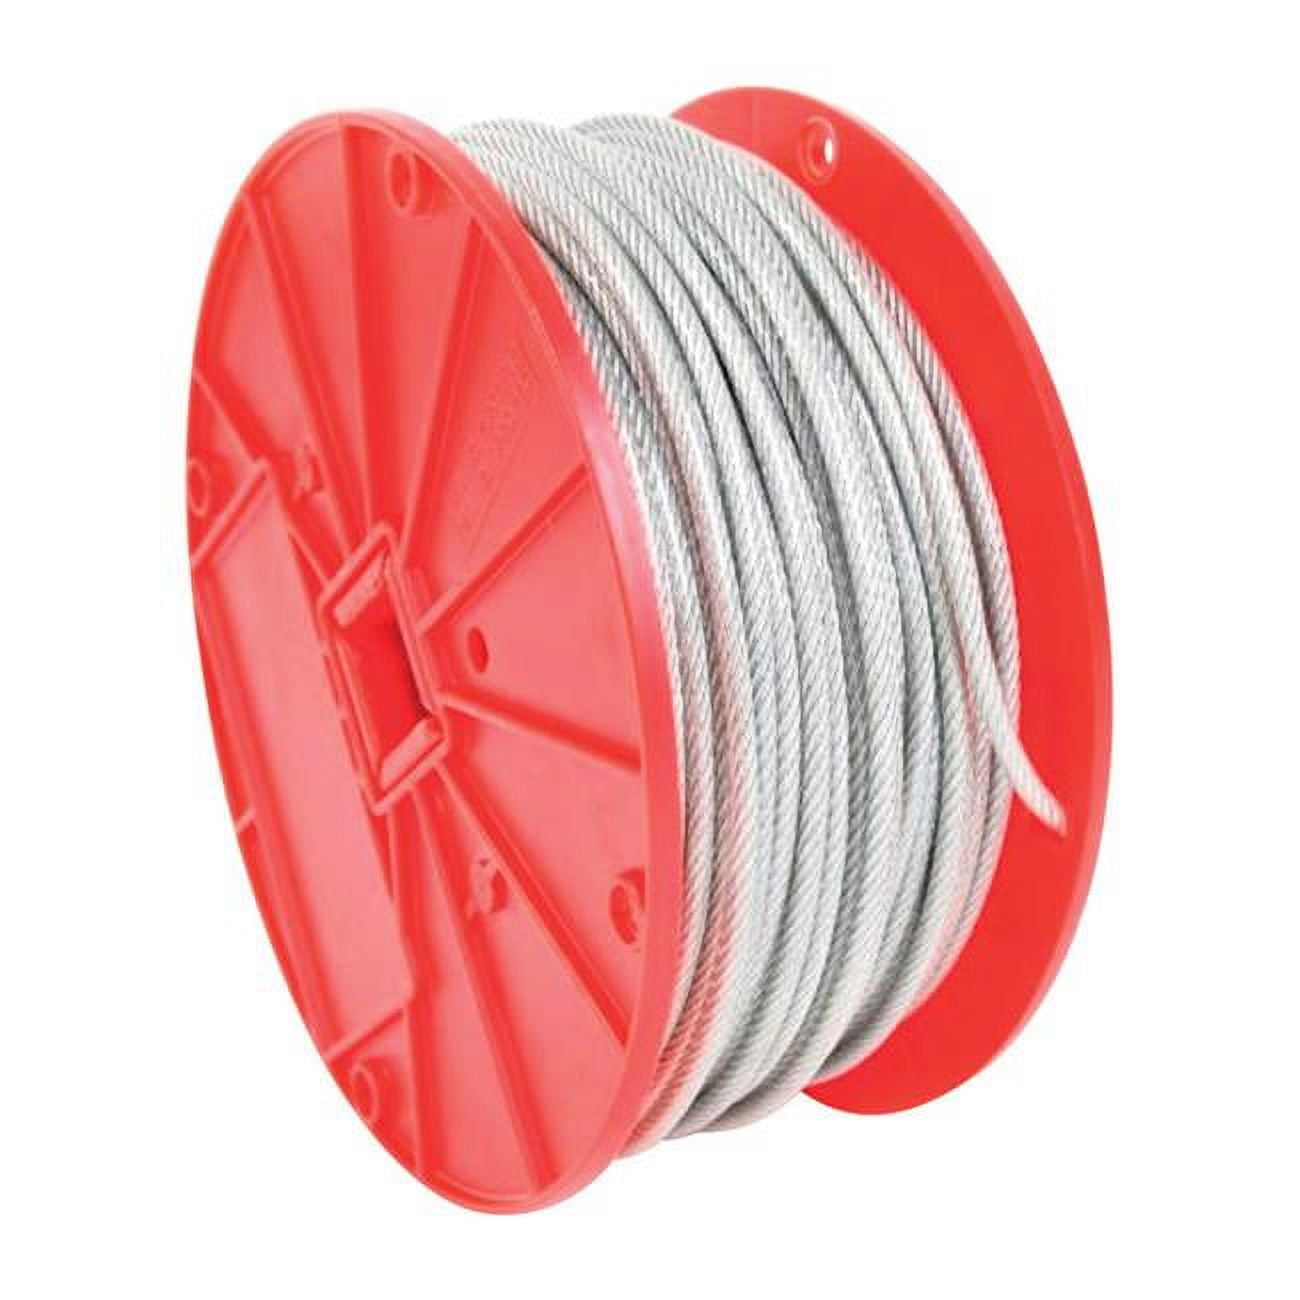 5006101 Galvanized Steel Cable, 0.125 In. Dia. X 500 Ft. - Clear